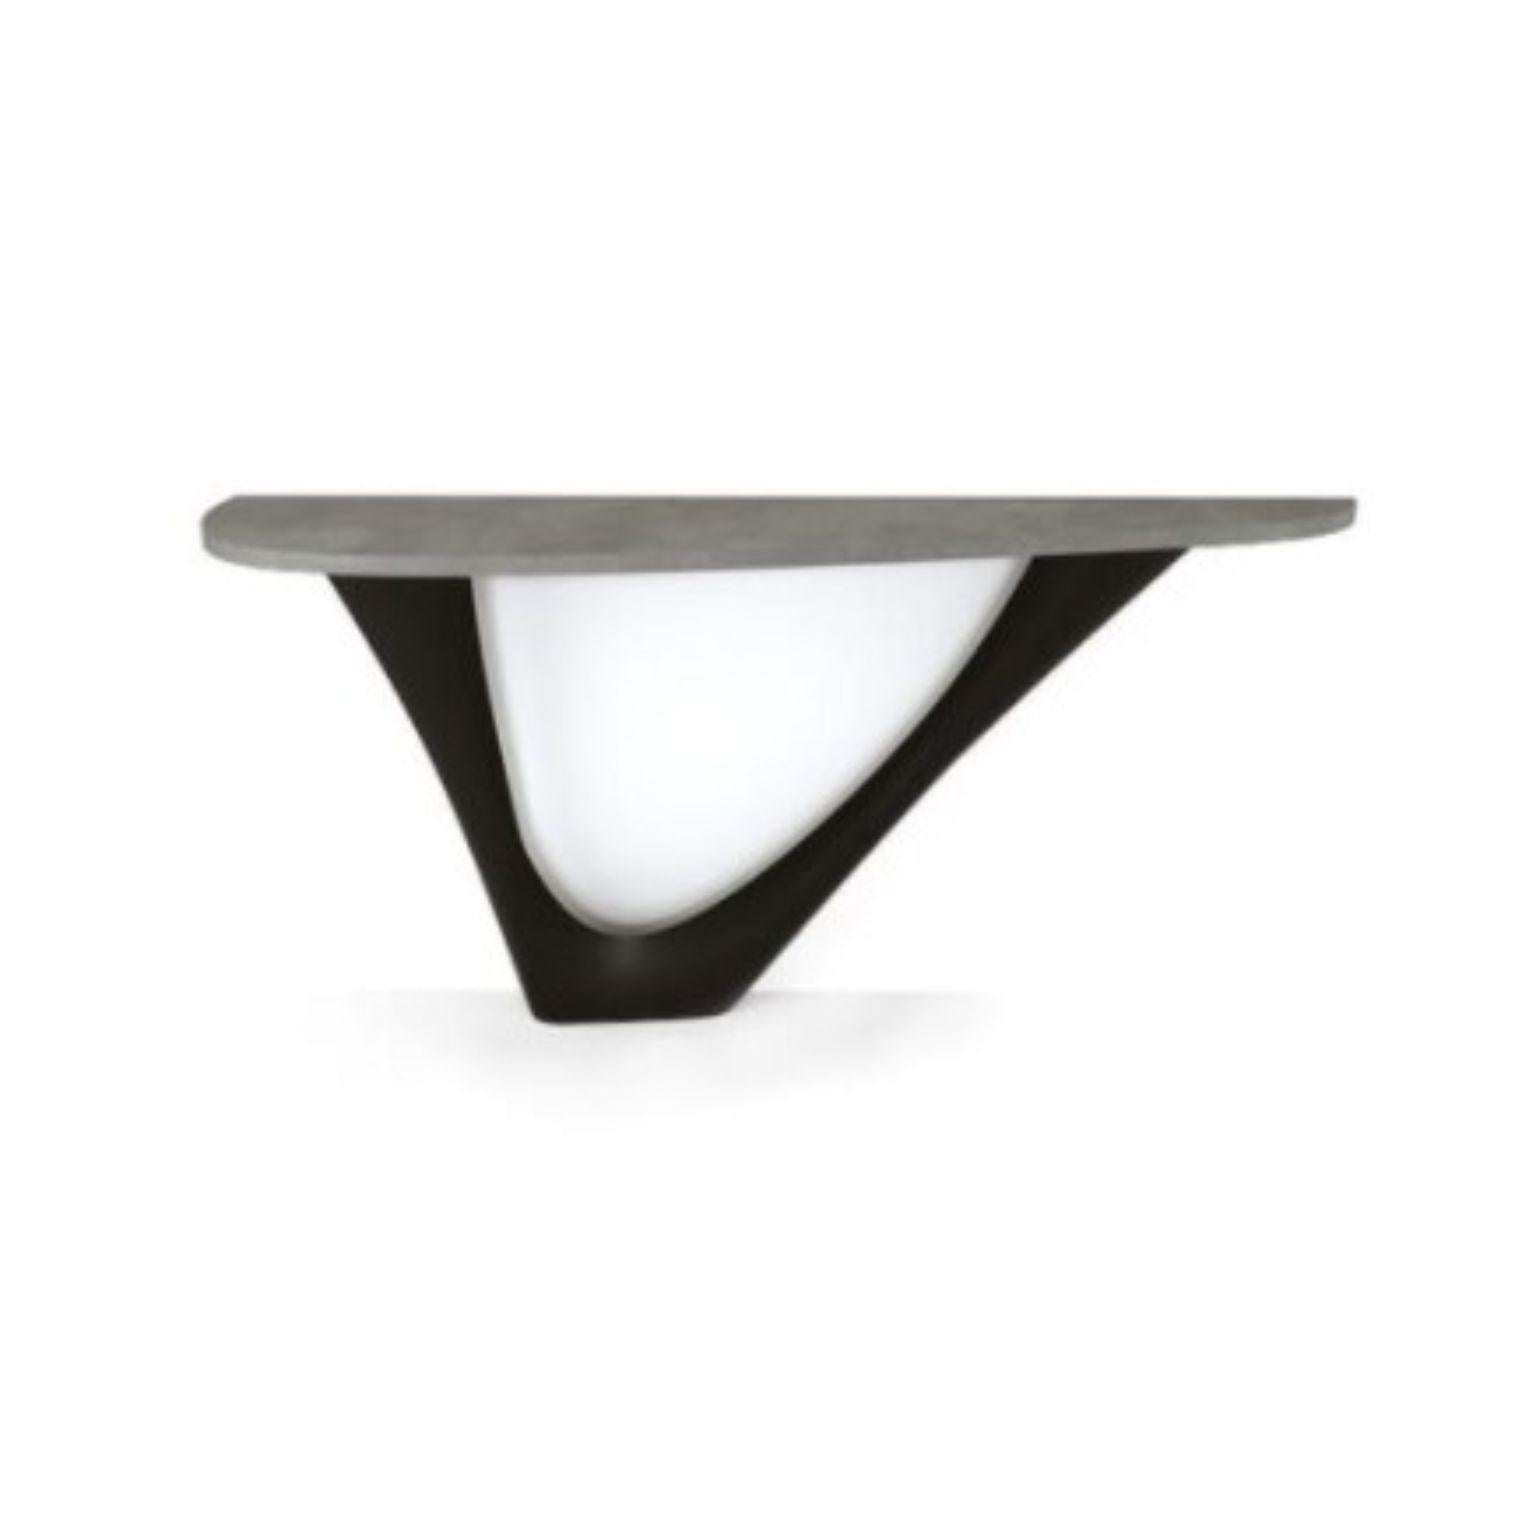 Black Brown G-Console mono steel base with concrete top by Zieta
Dimensions: D 43 x W 159 x H 75 cm 
Material: Concrete, carbon steel.
Also available in different colors and dimensions.

G-Console is another bionic object in our collection. Created